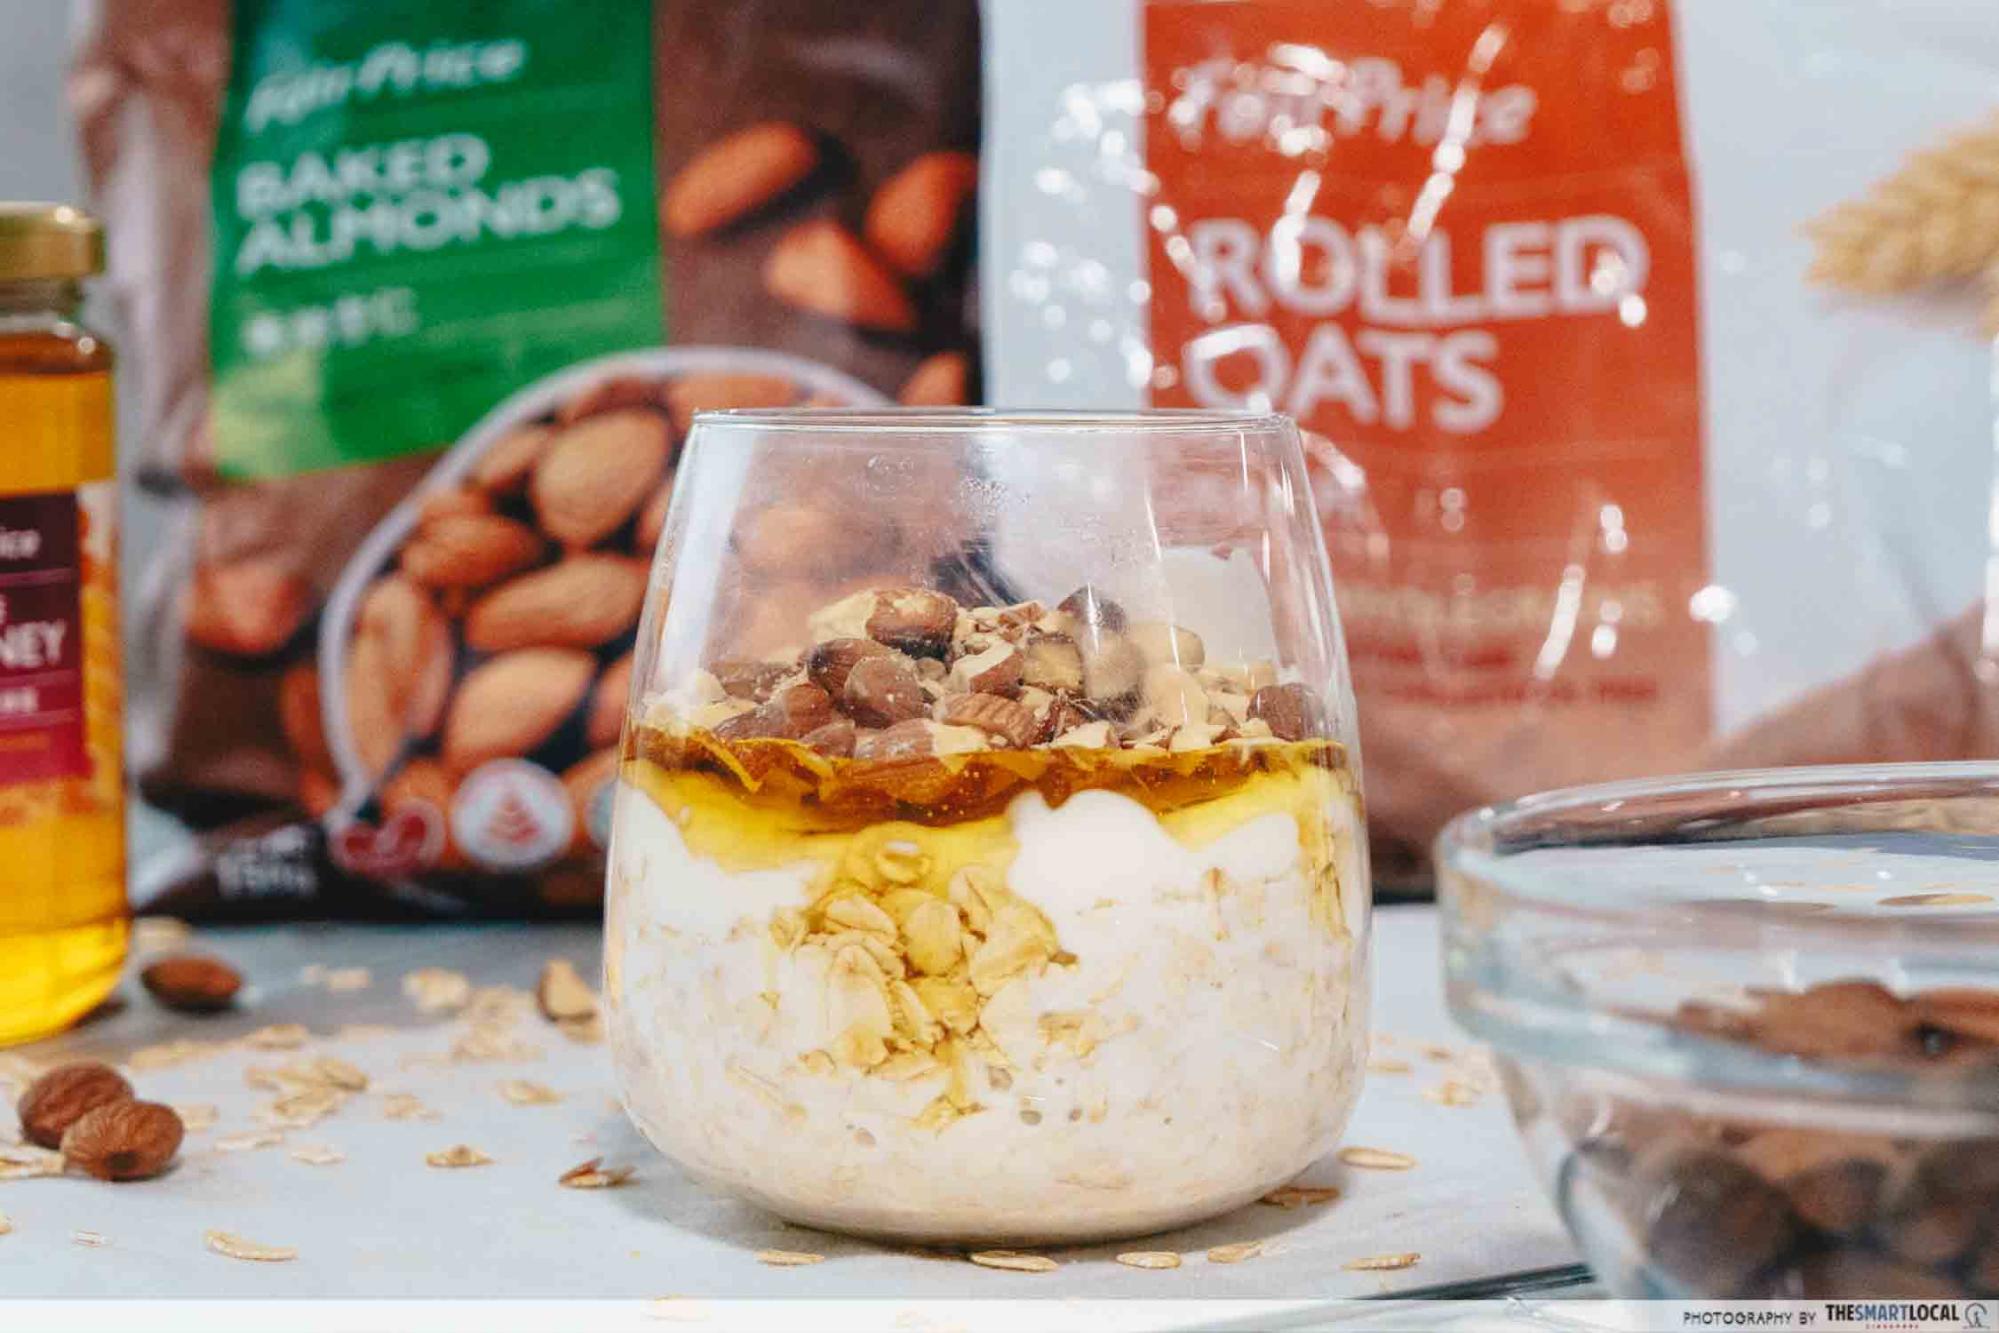 FairPrice rolled oats overnight oats 